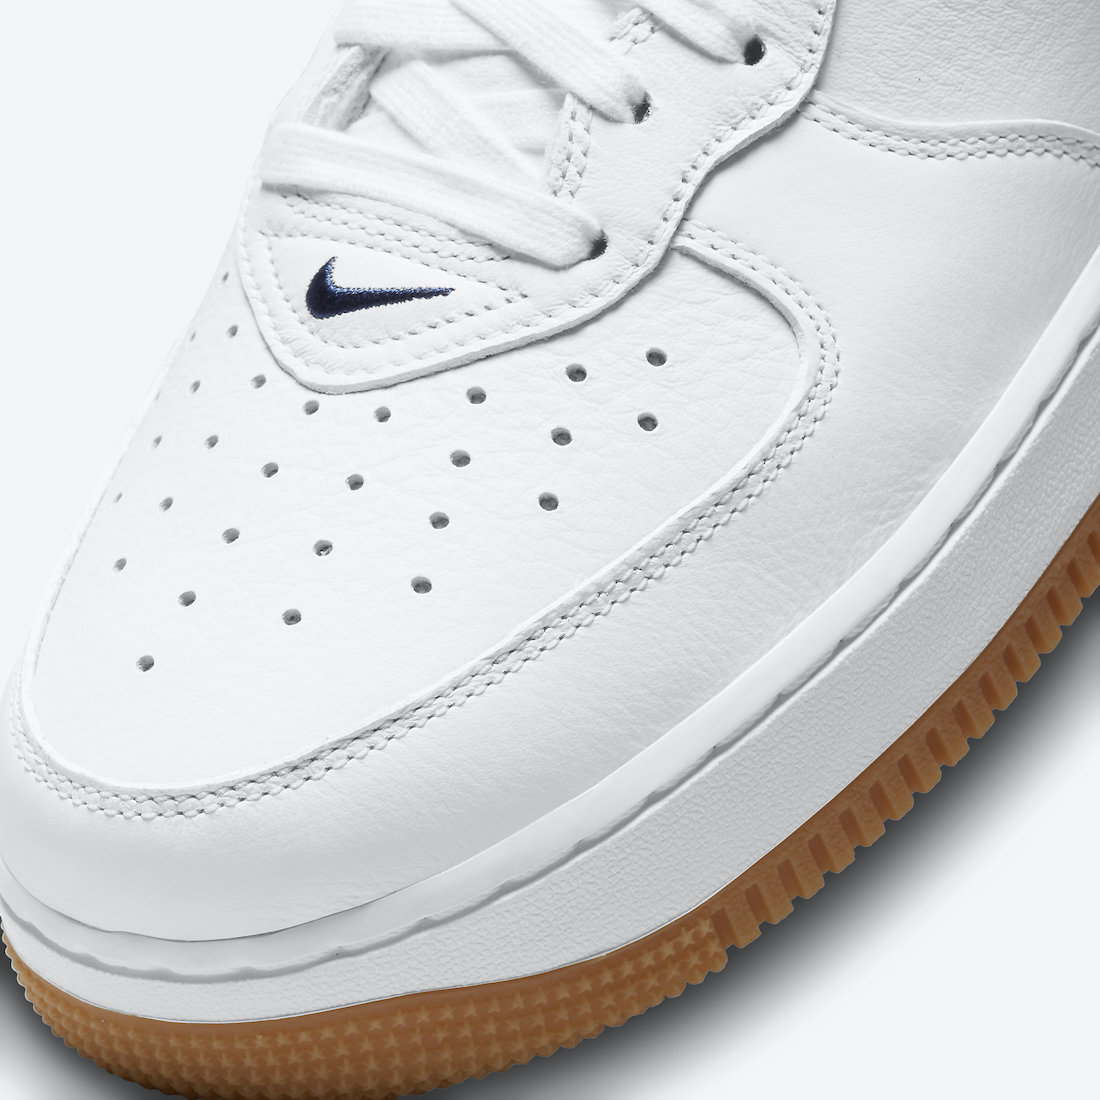 Nike Air Force 1 Mid NYC DH5622-100 Release Date